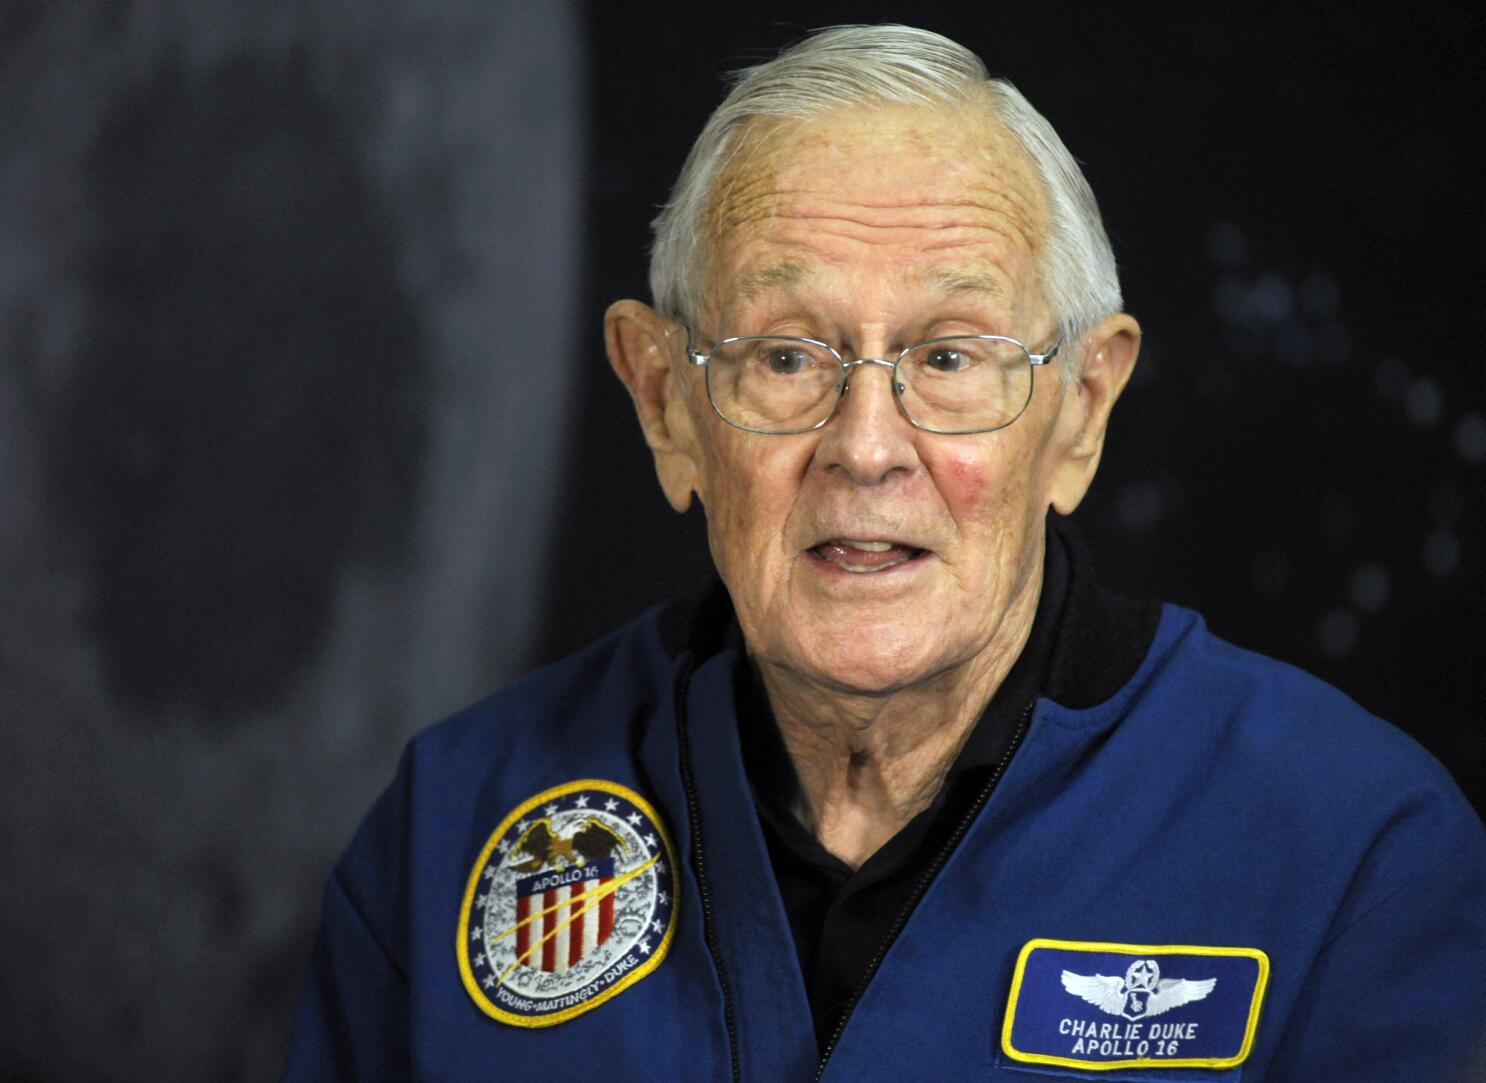 Apollo 16 moonwalker reflects on mission's 50th anniversary - The